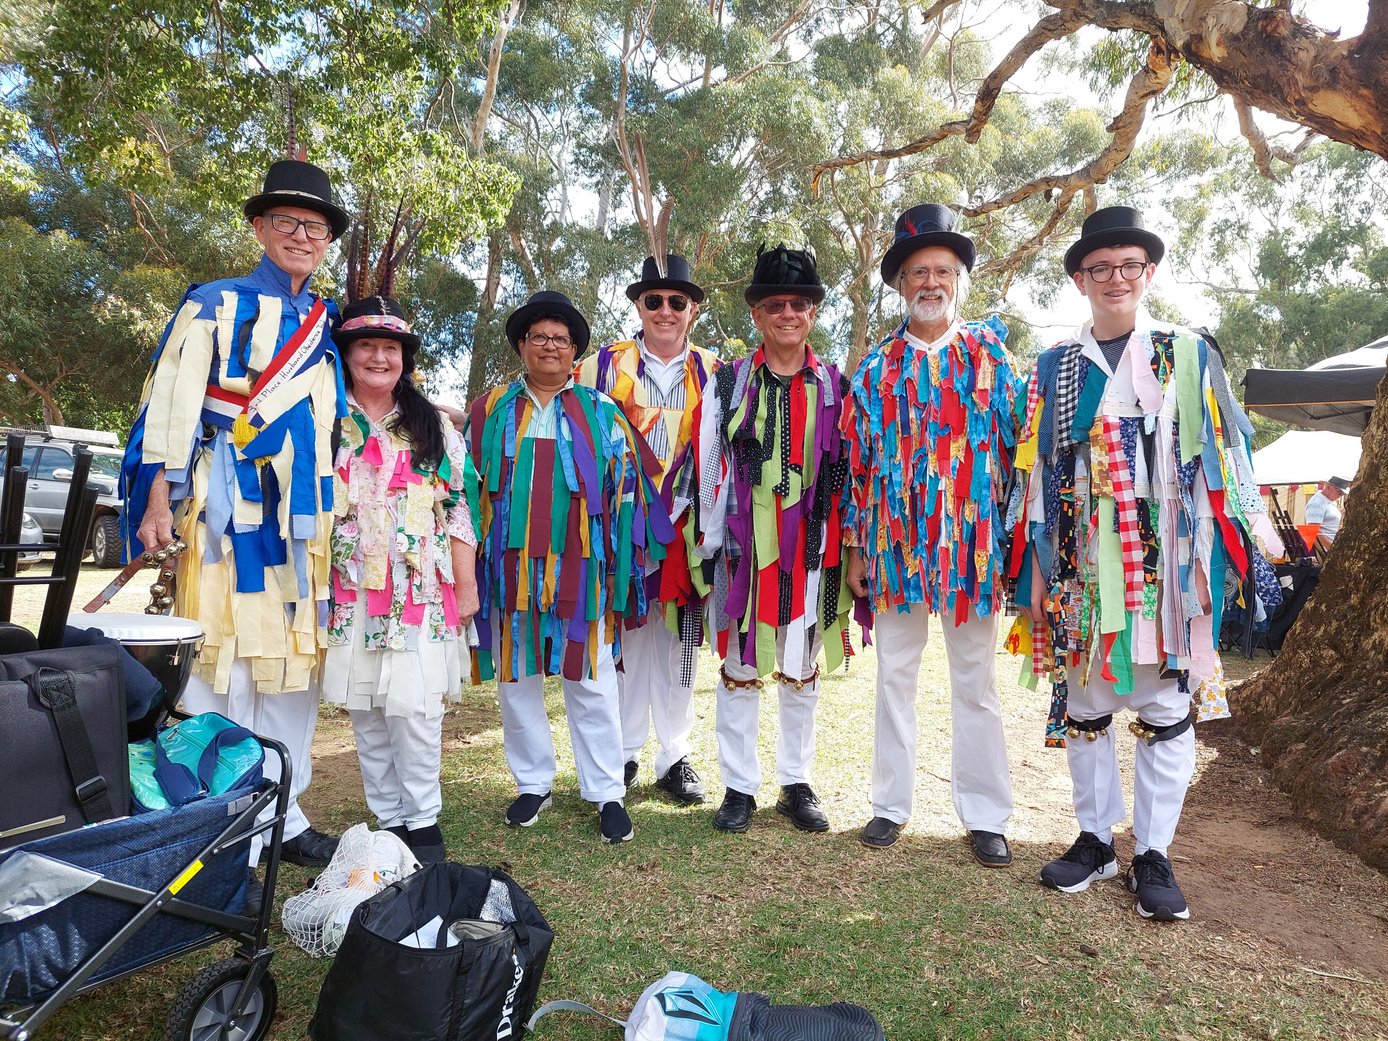 Mad Tatters morris dance team posing for photo after a performance